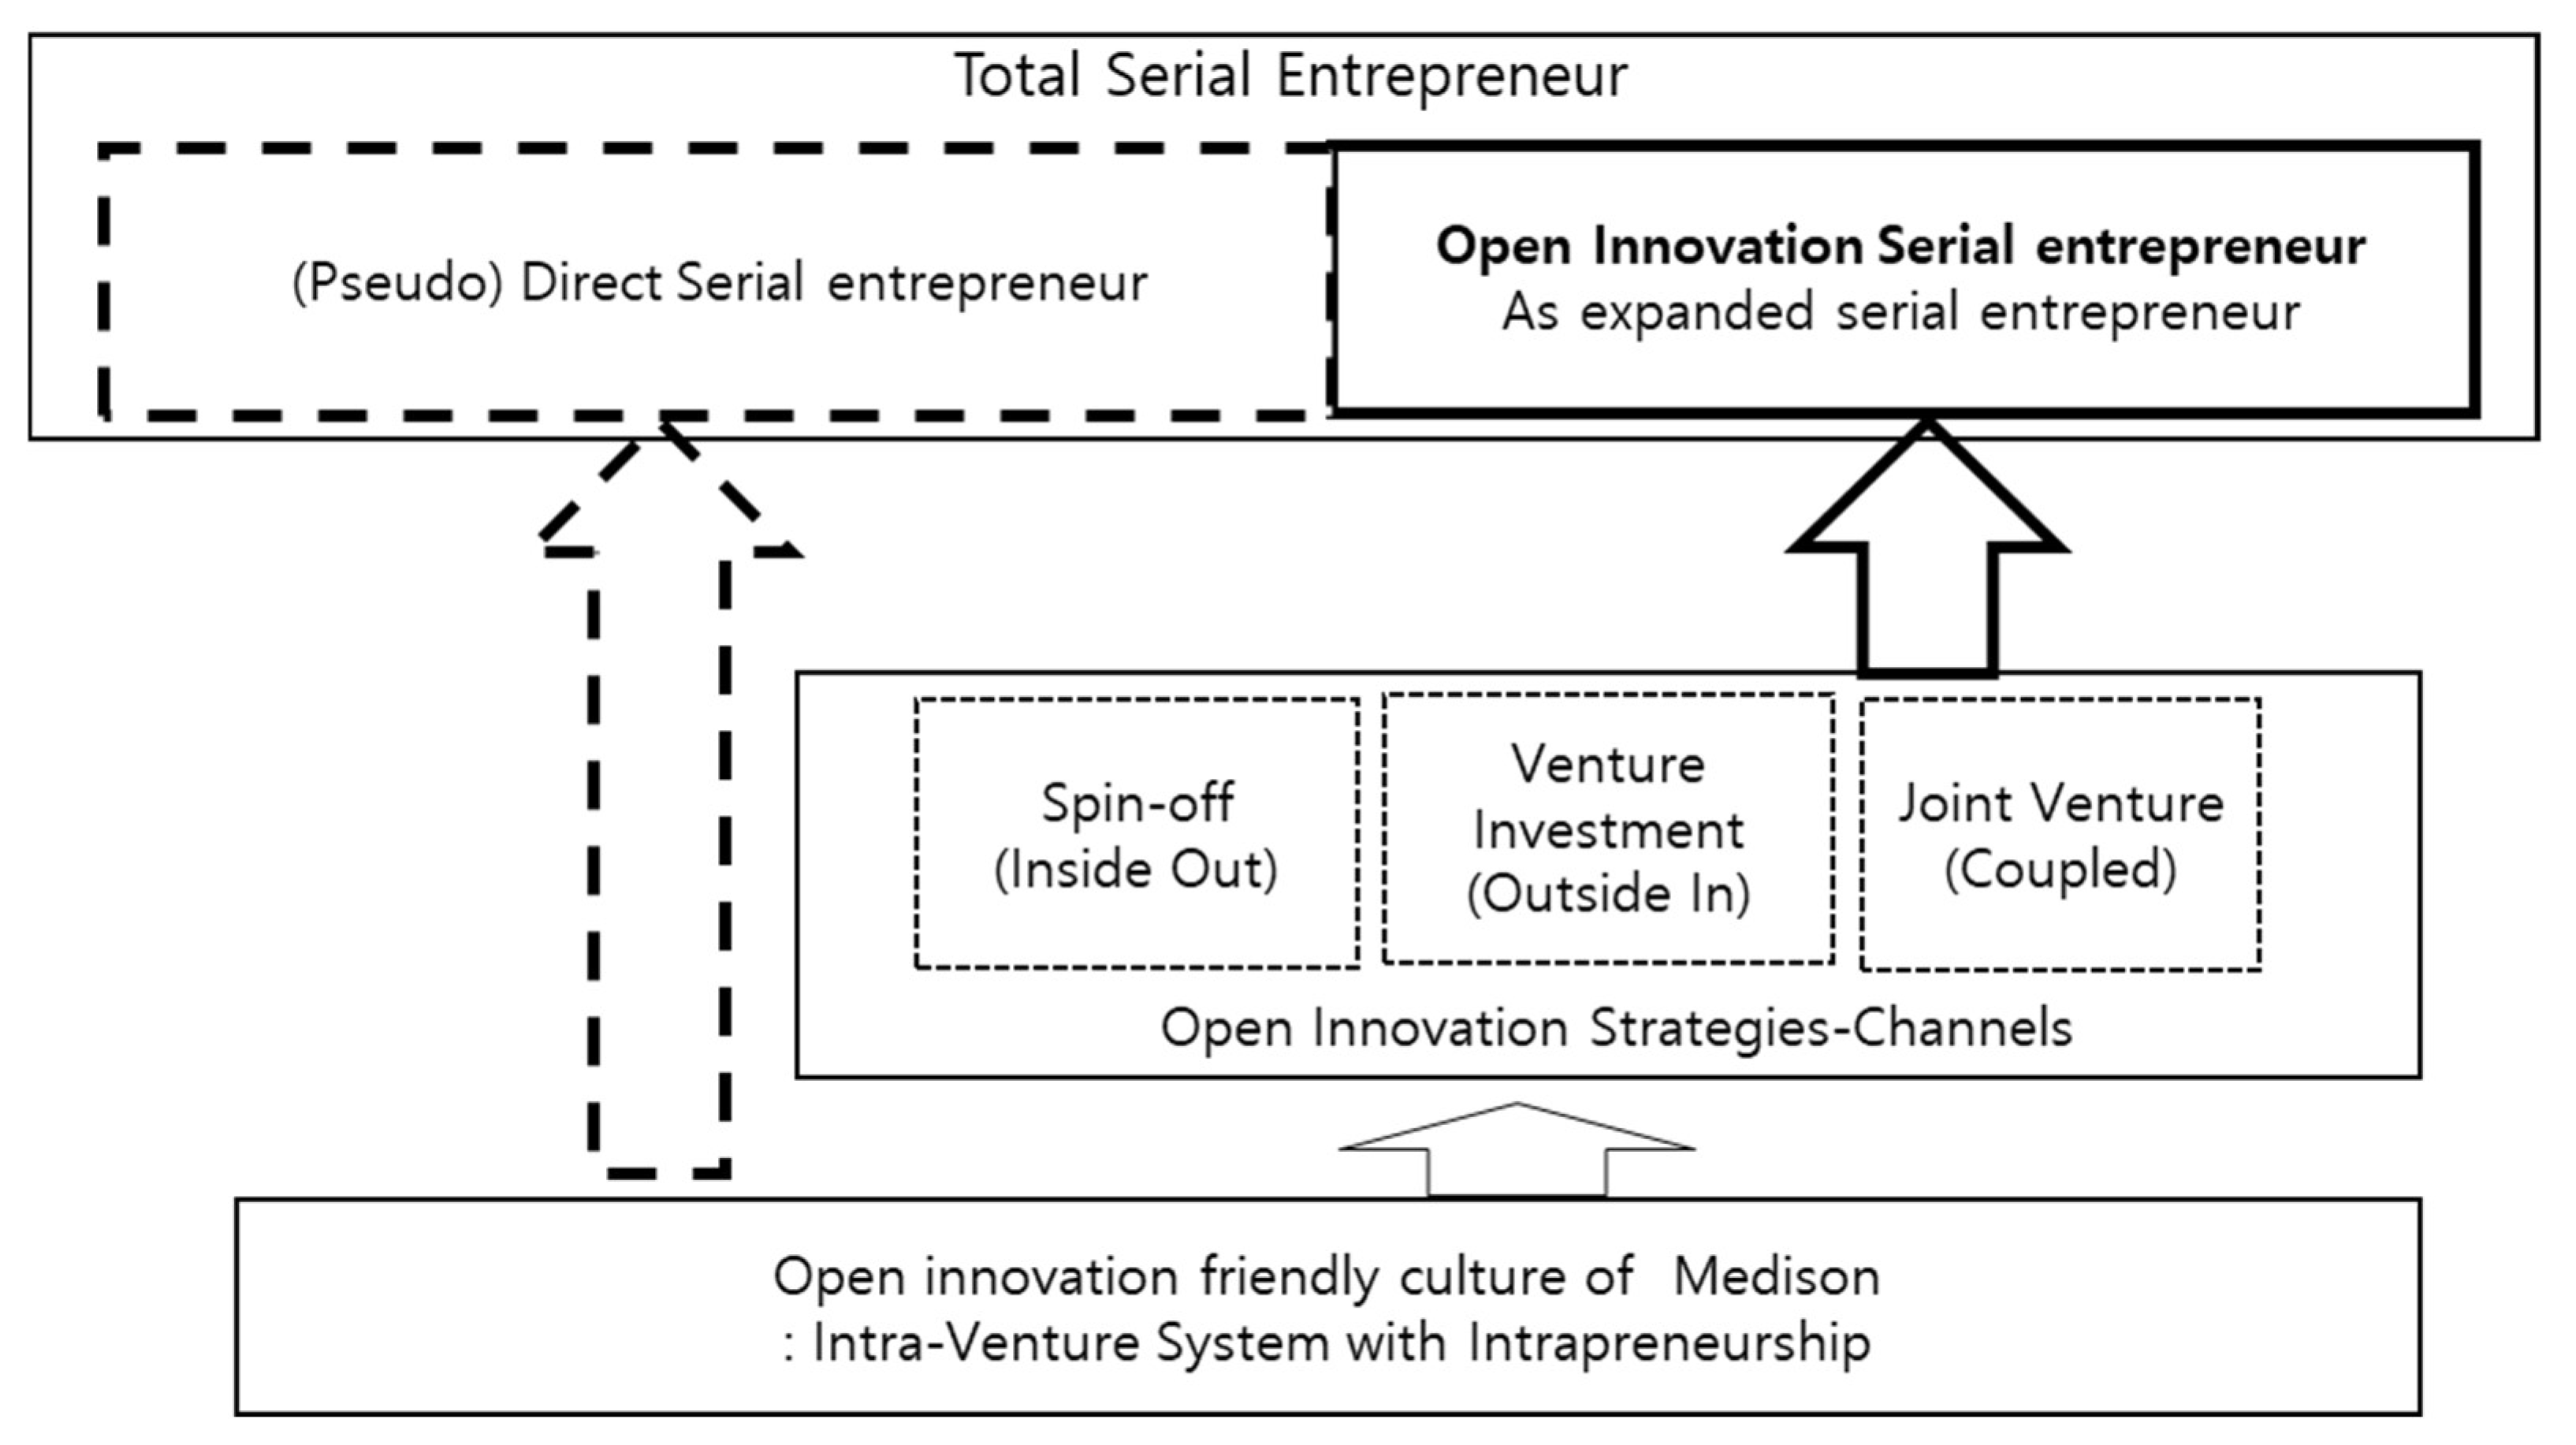 Getting the right spin on innovation